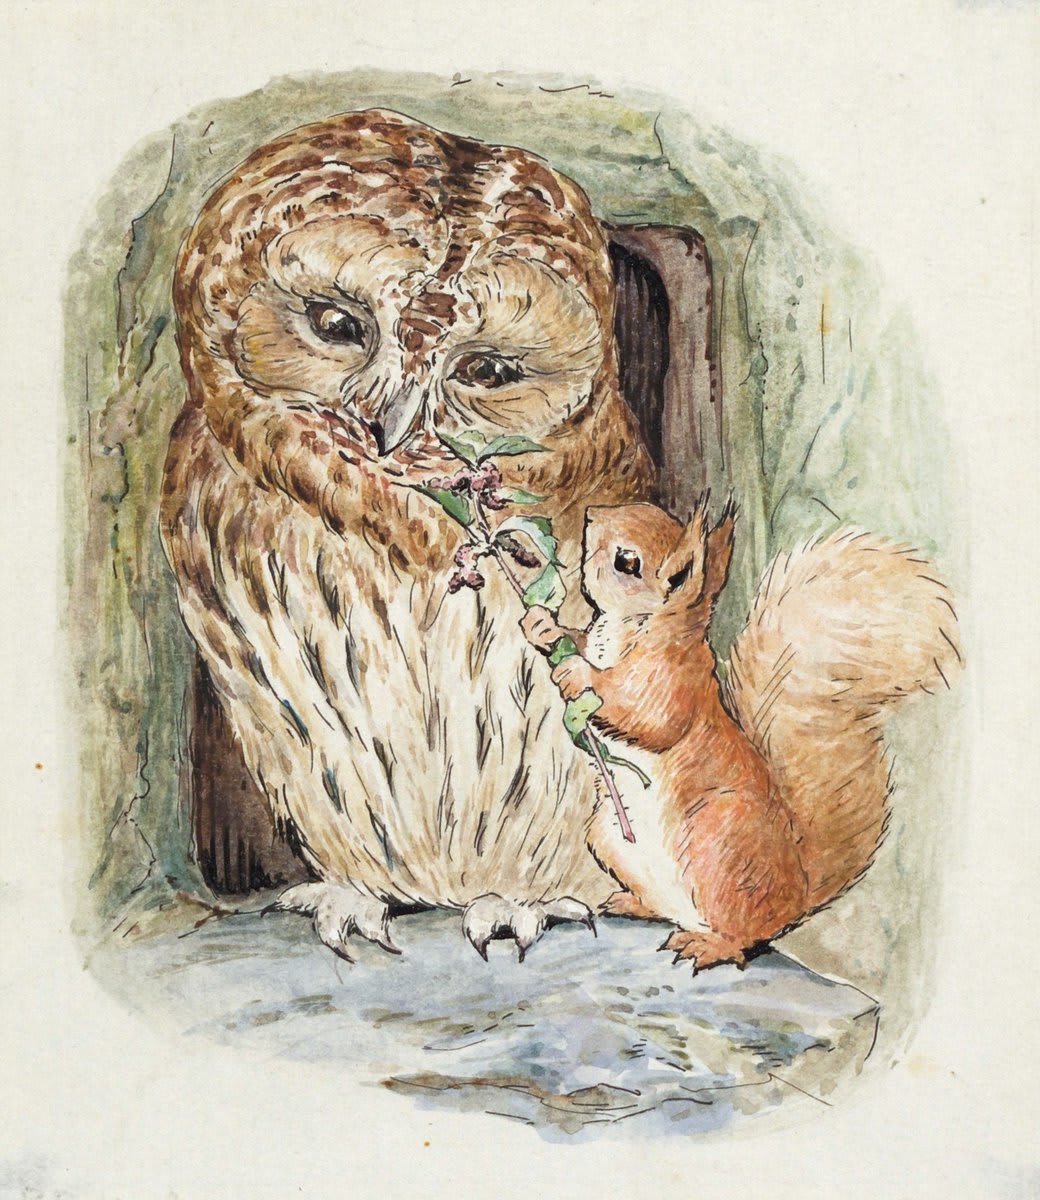 Beatrix Potter's 'The Tale of Squirrel Nutkin' tells the story of Nutkin and a bad tempered tawny owl named Old Brown 🍂 Visit our exhibition on Beatrix Potter - https://t.co/TDO7D5cWAp © National Trust / Colin Liddie